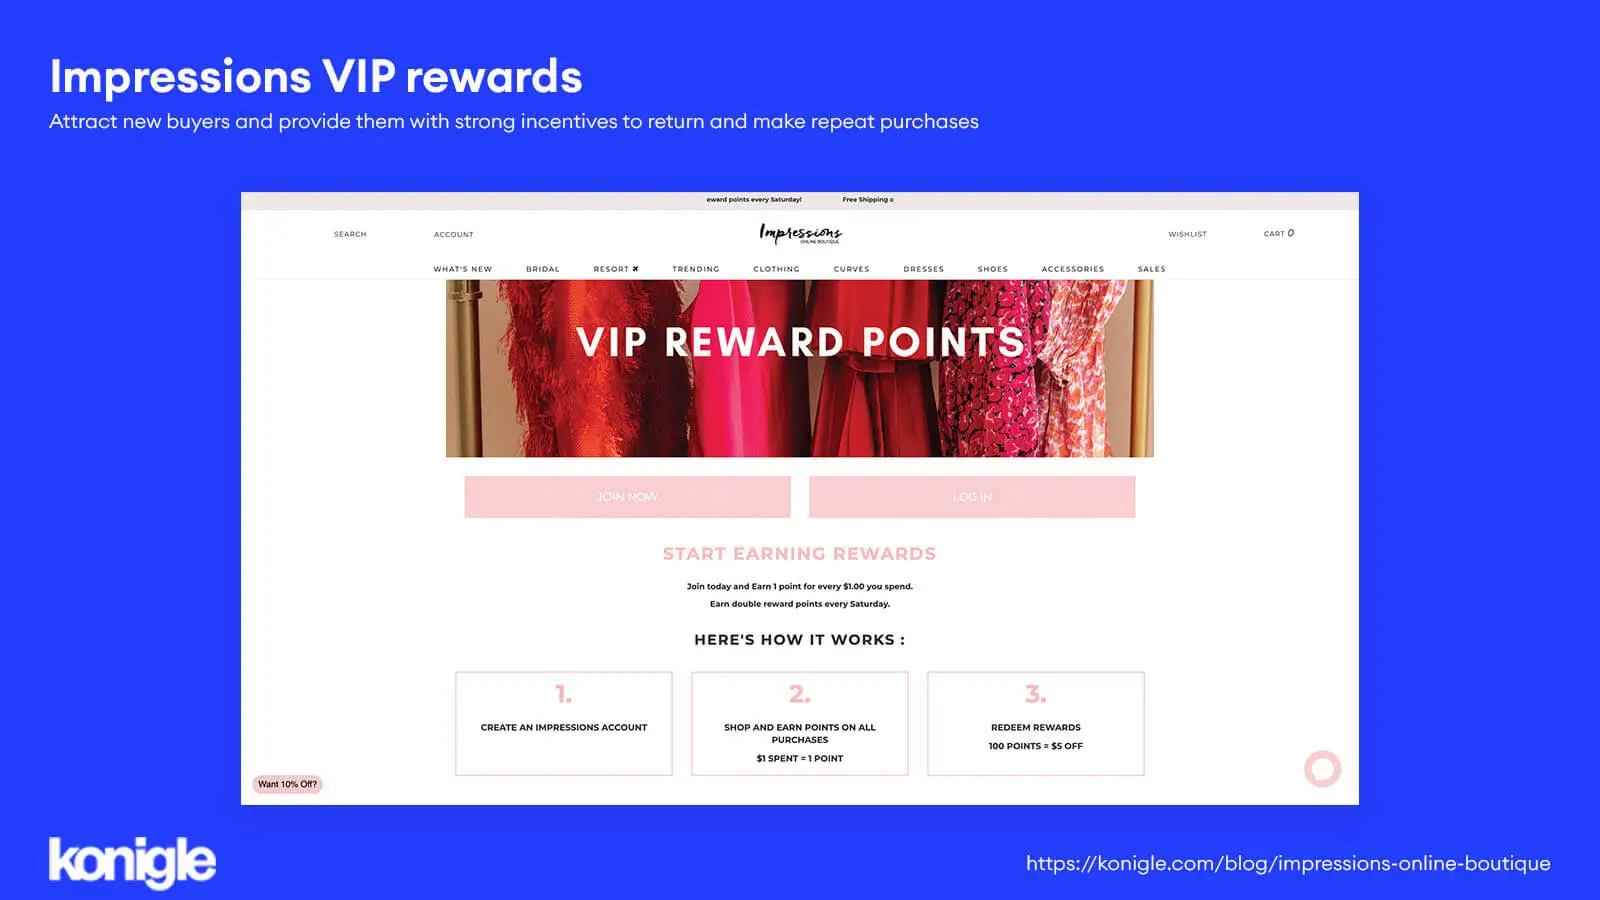 Impressions Online Boutique has a VIP rewards system in place to incentivise their customers